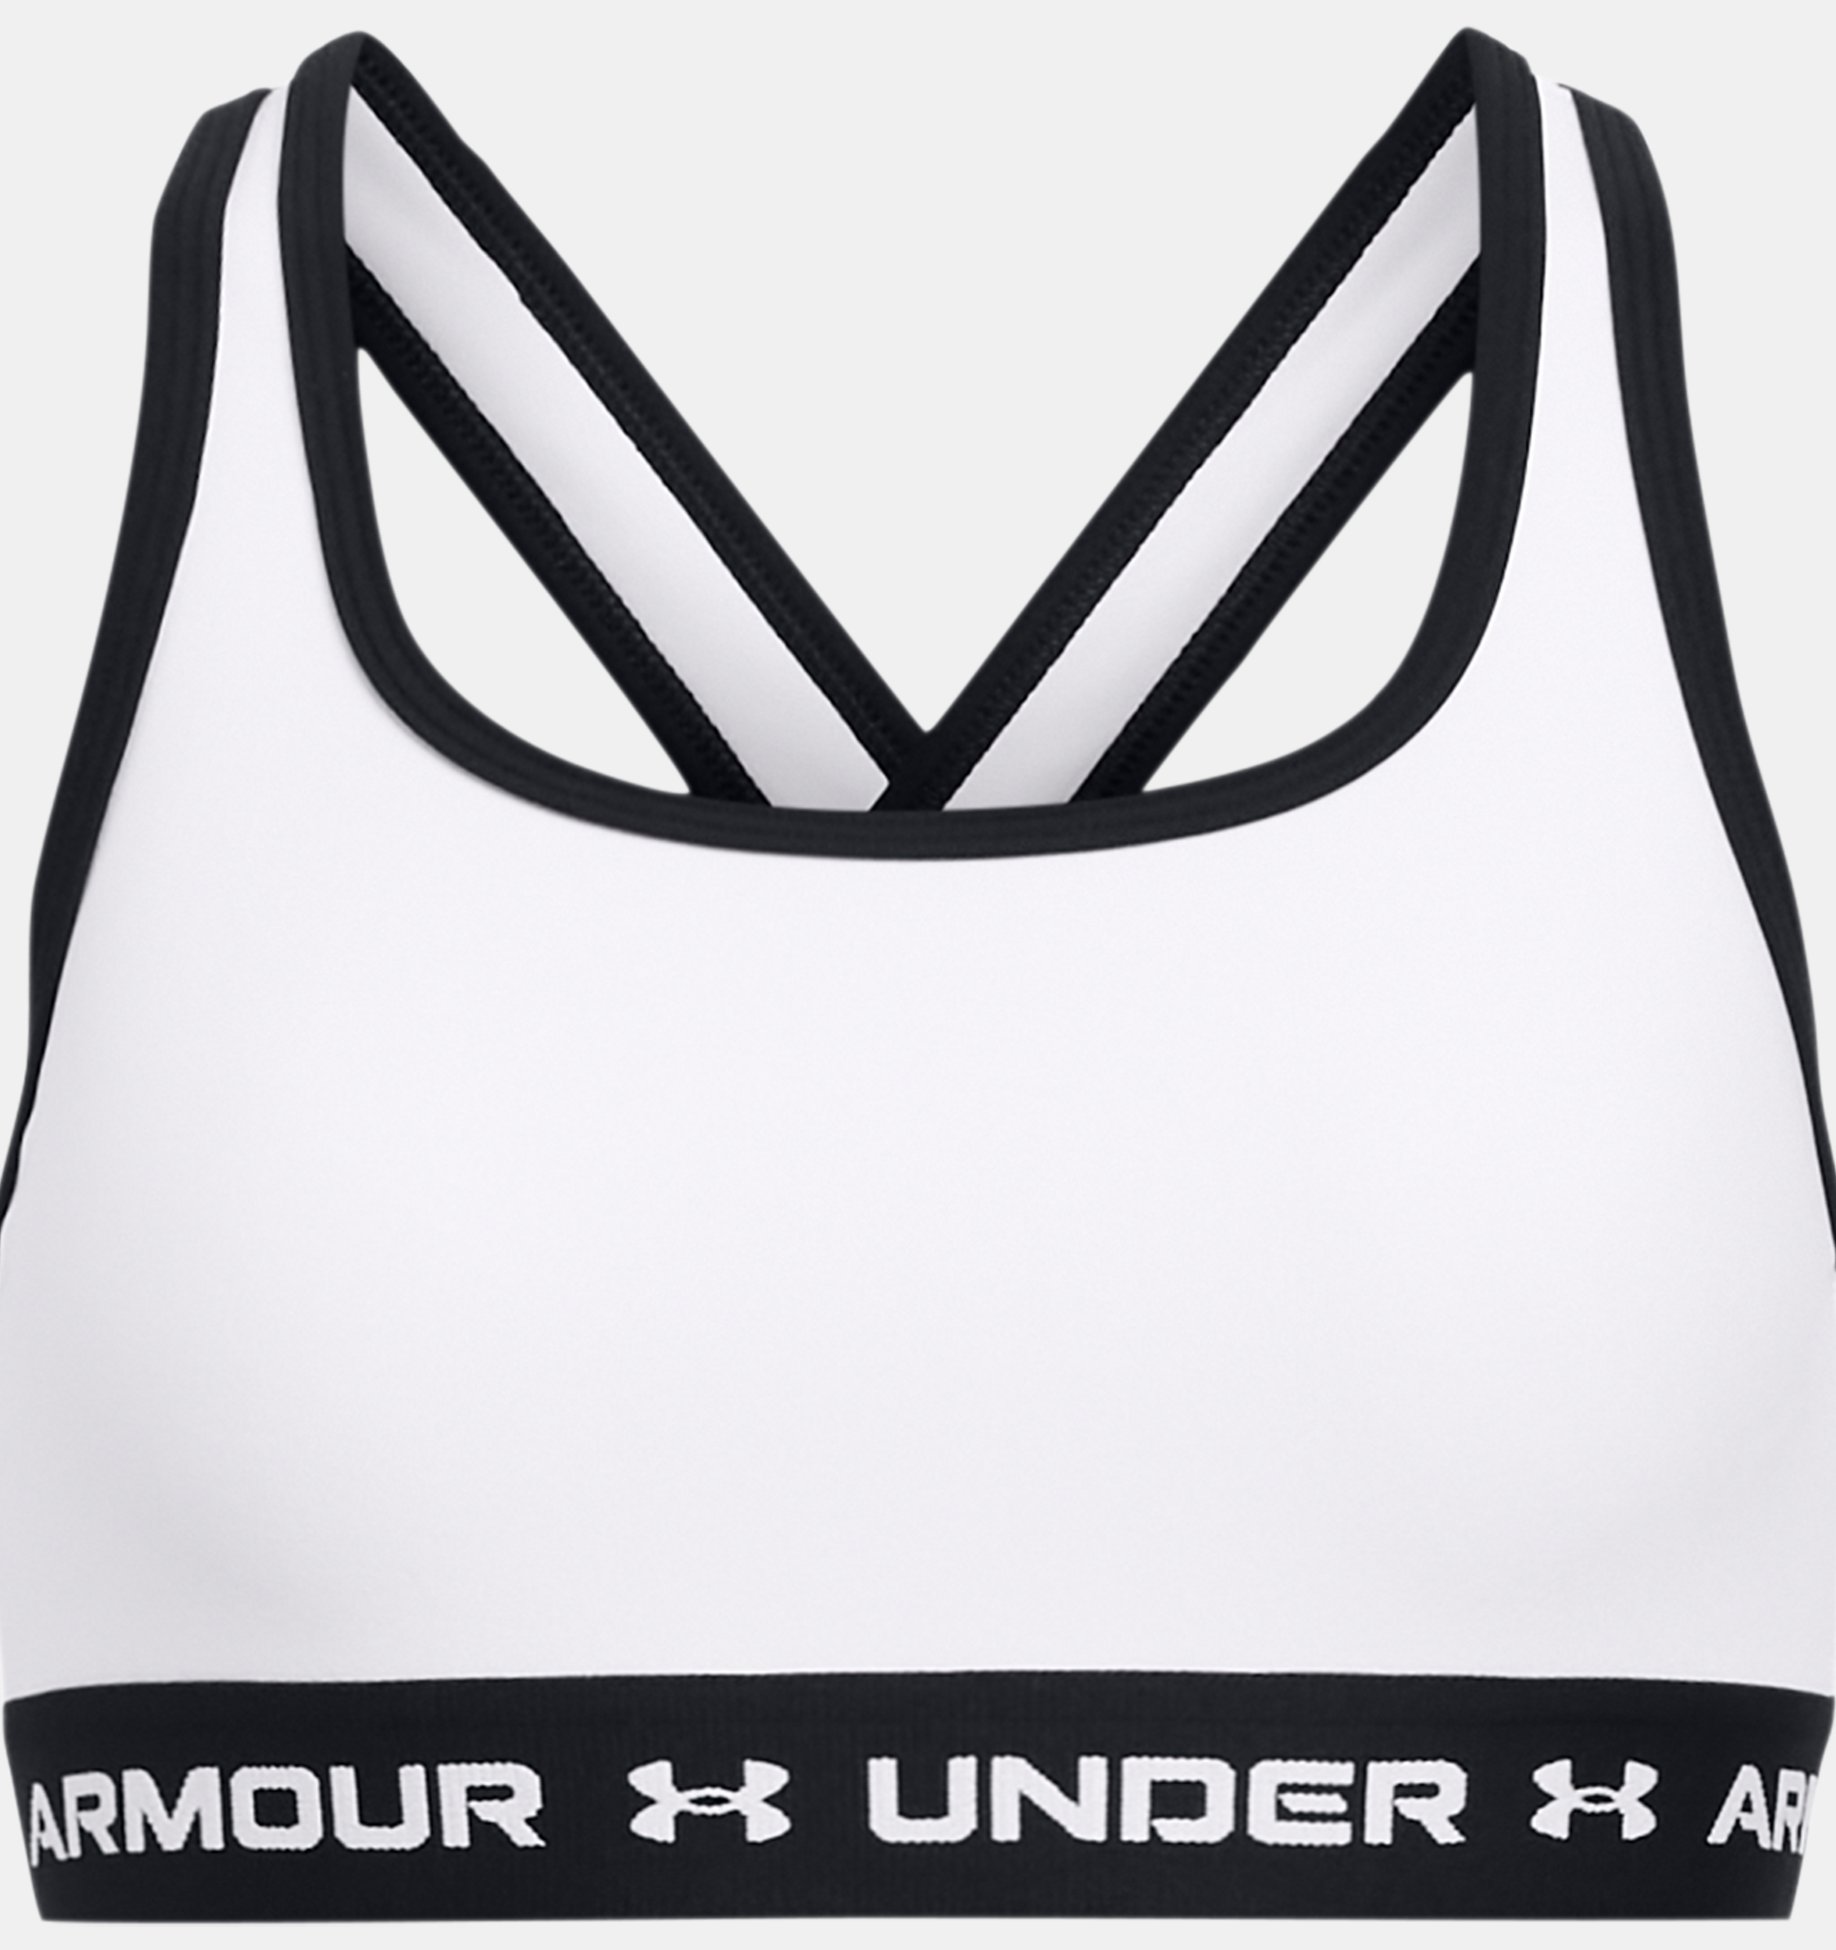 https://underarmour.scene7.com/is/image/Underarmour/PS1369971-102_HF?rp=standard-0pad|pdpZoomDesktop&scl=0.72&fmt=jpg&qlt=85&resMode=sharp2&cache=on,on&bgc=f0f0f0&wid=1836&hei=1950&size=1500,1500